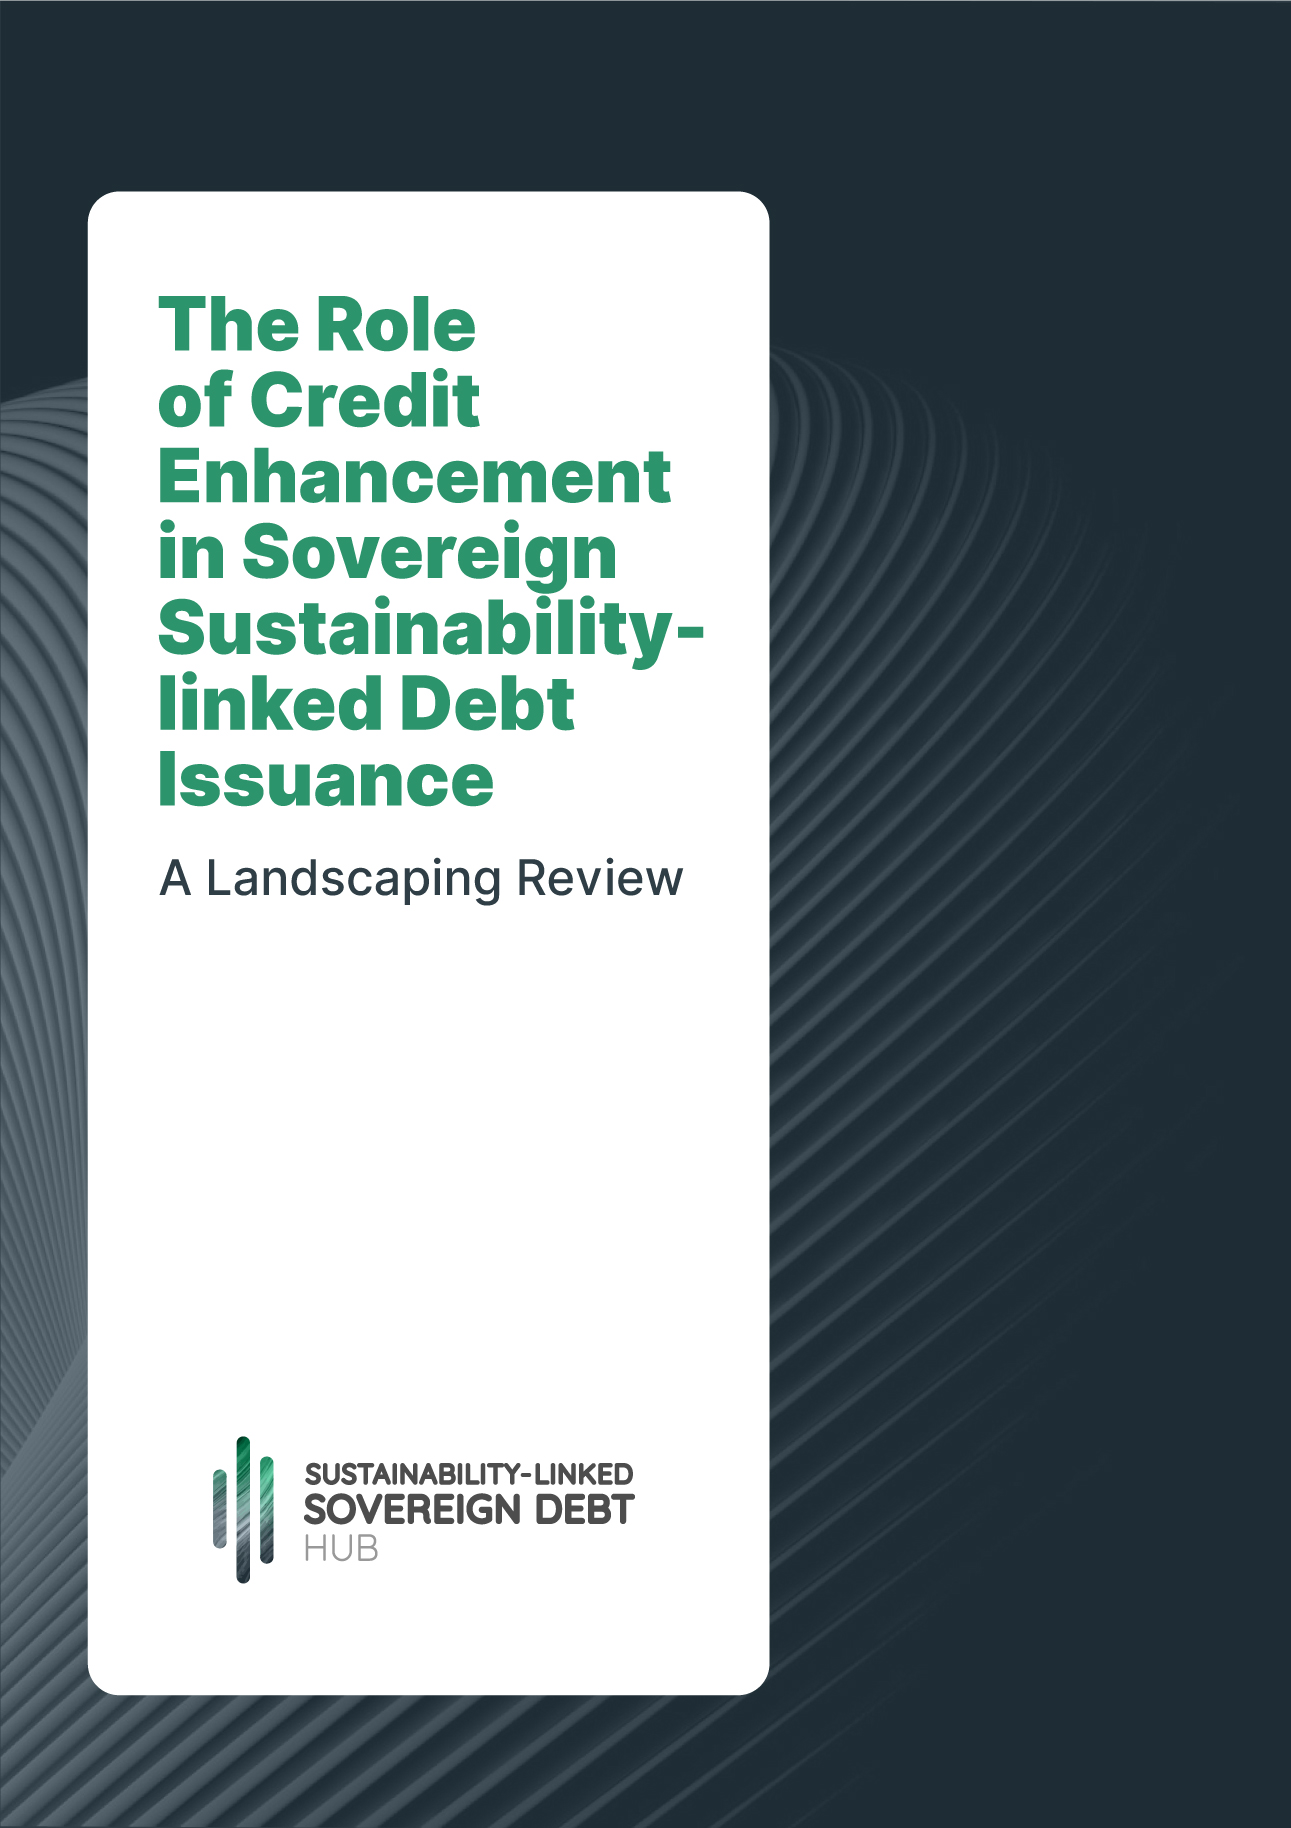 The Role of Credit Enhancement in Sovereign Sustainability-linked Debt Issuance